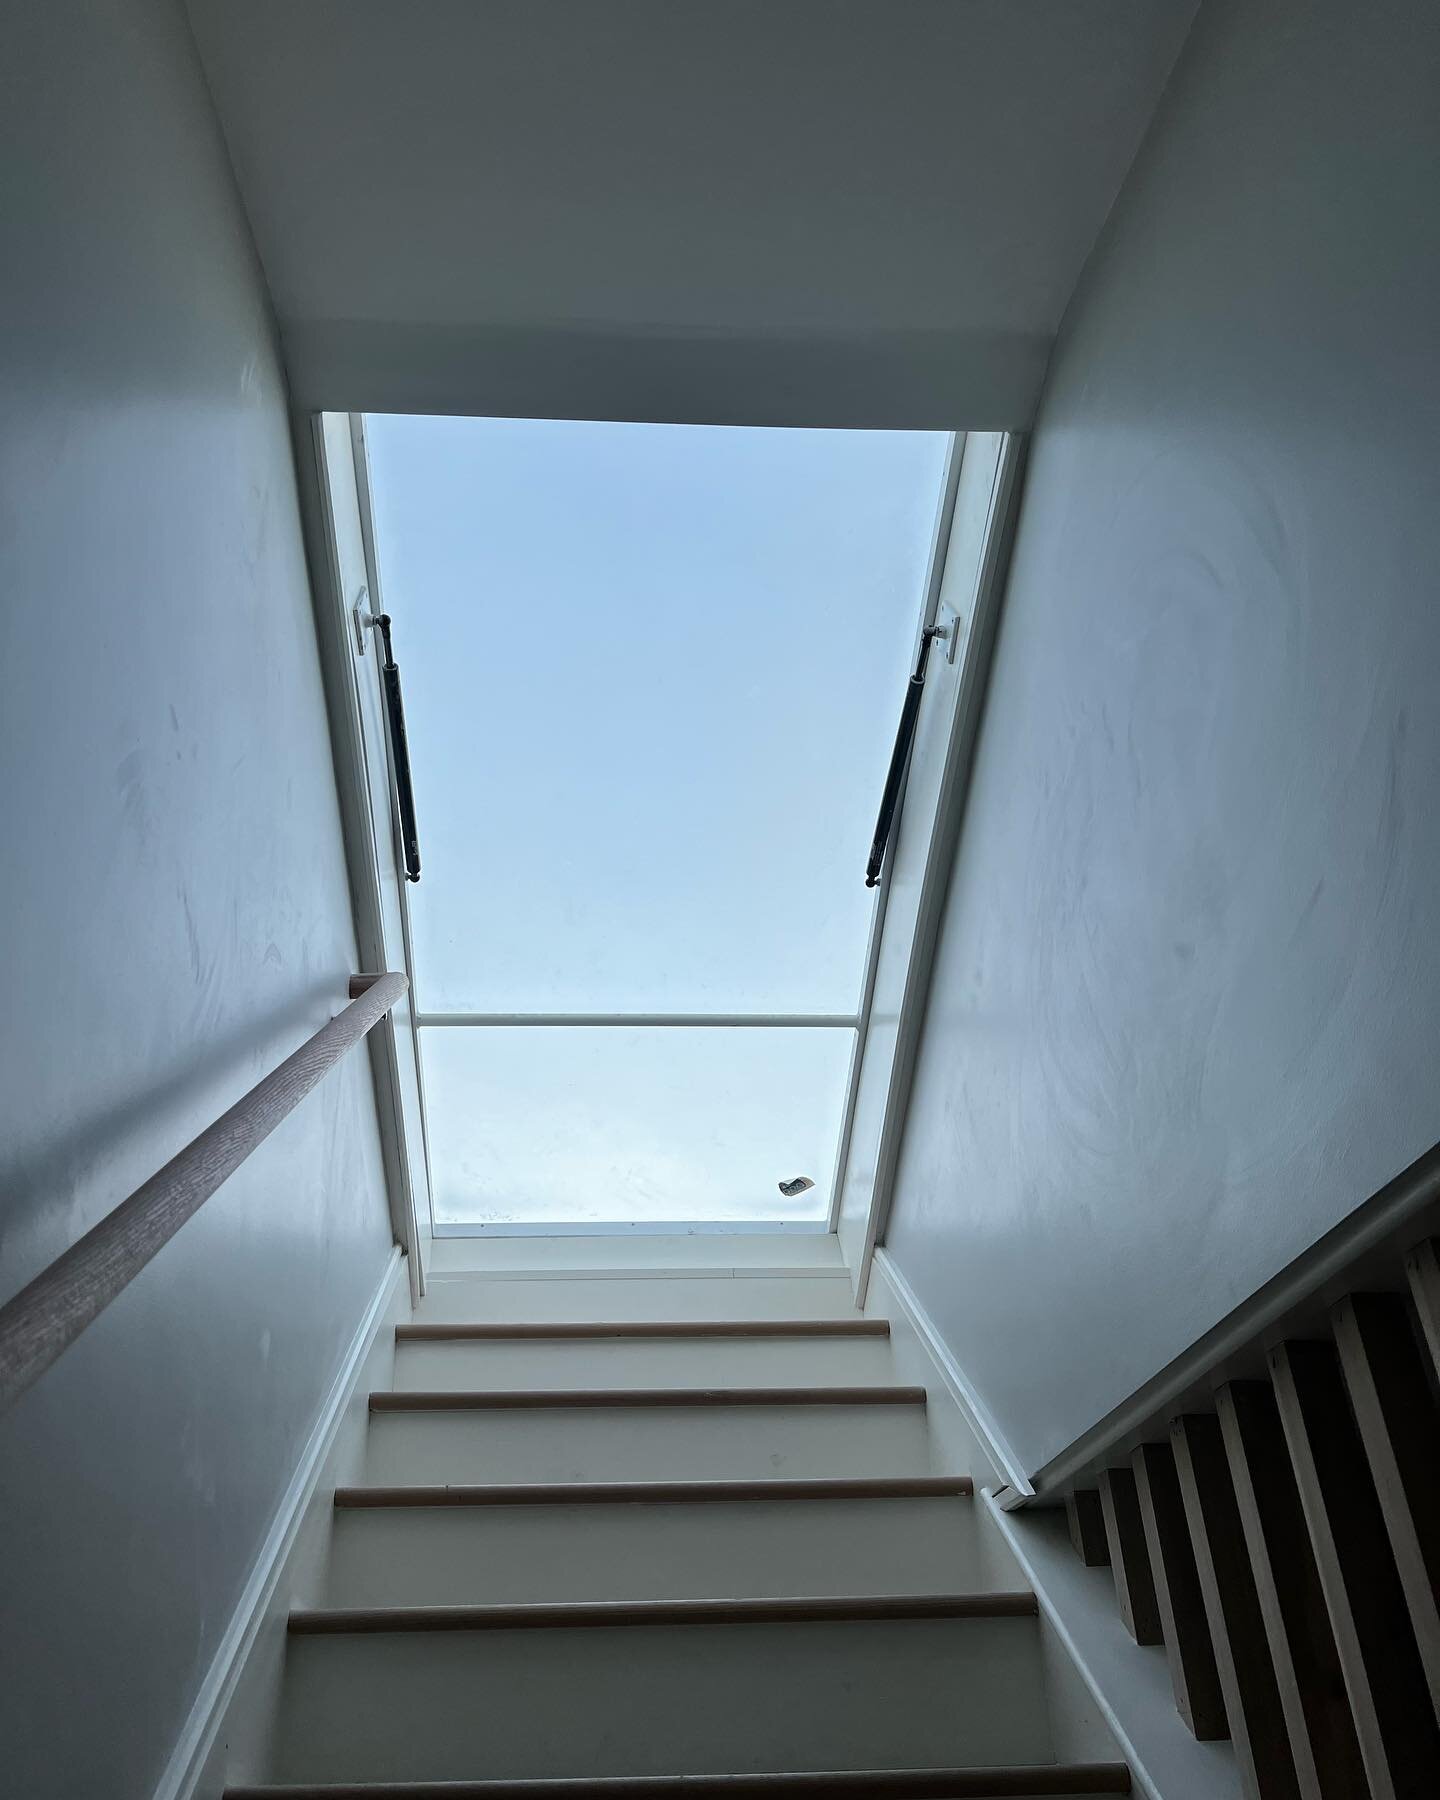 Skylight before and after